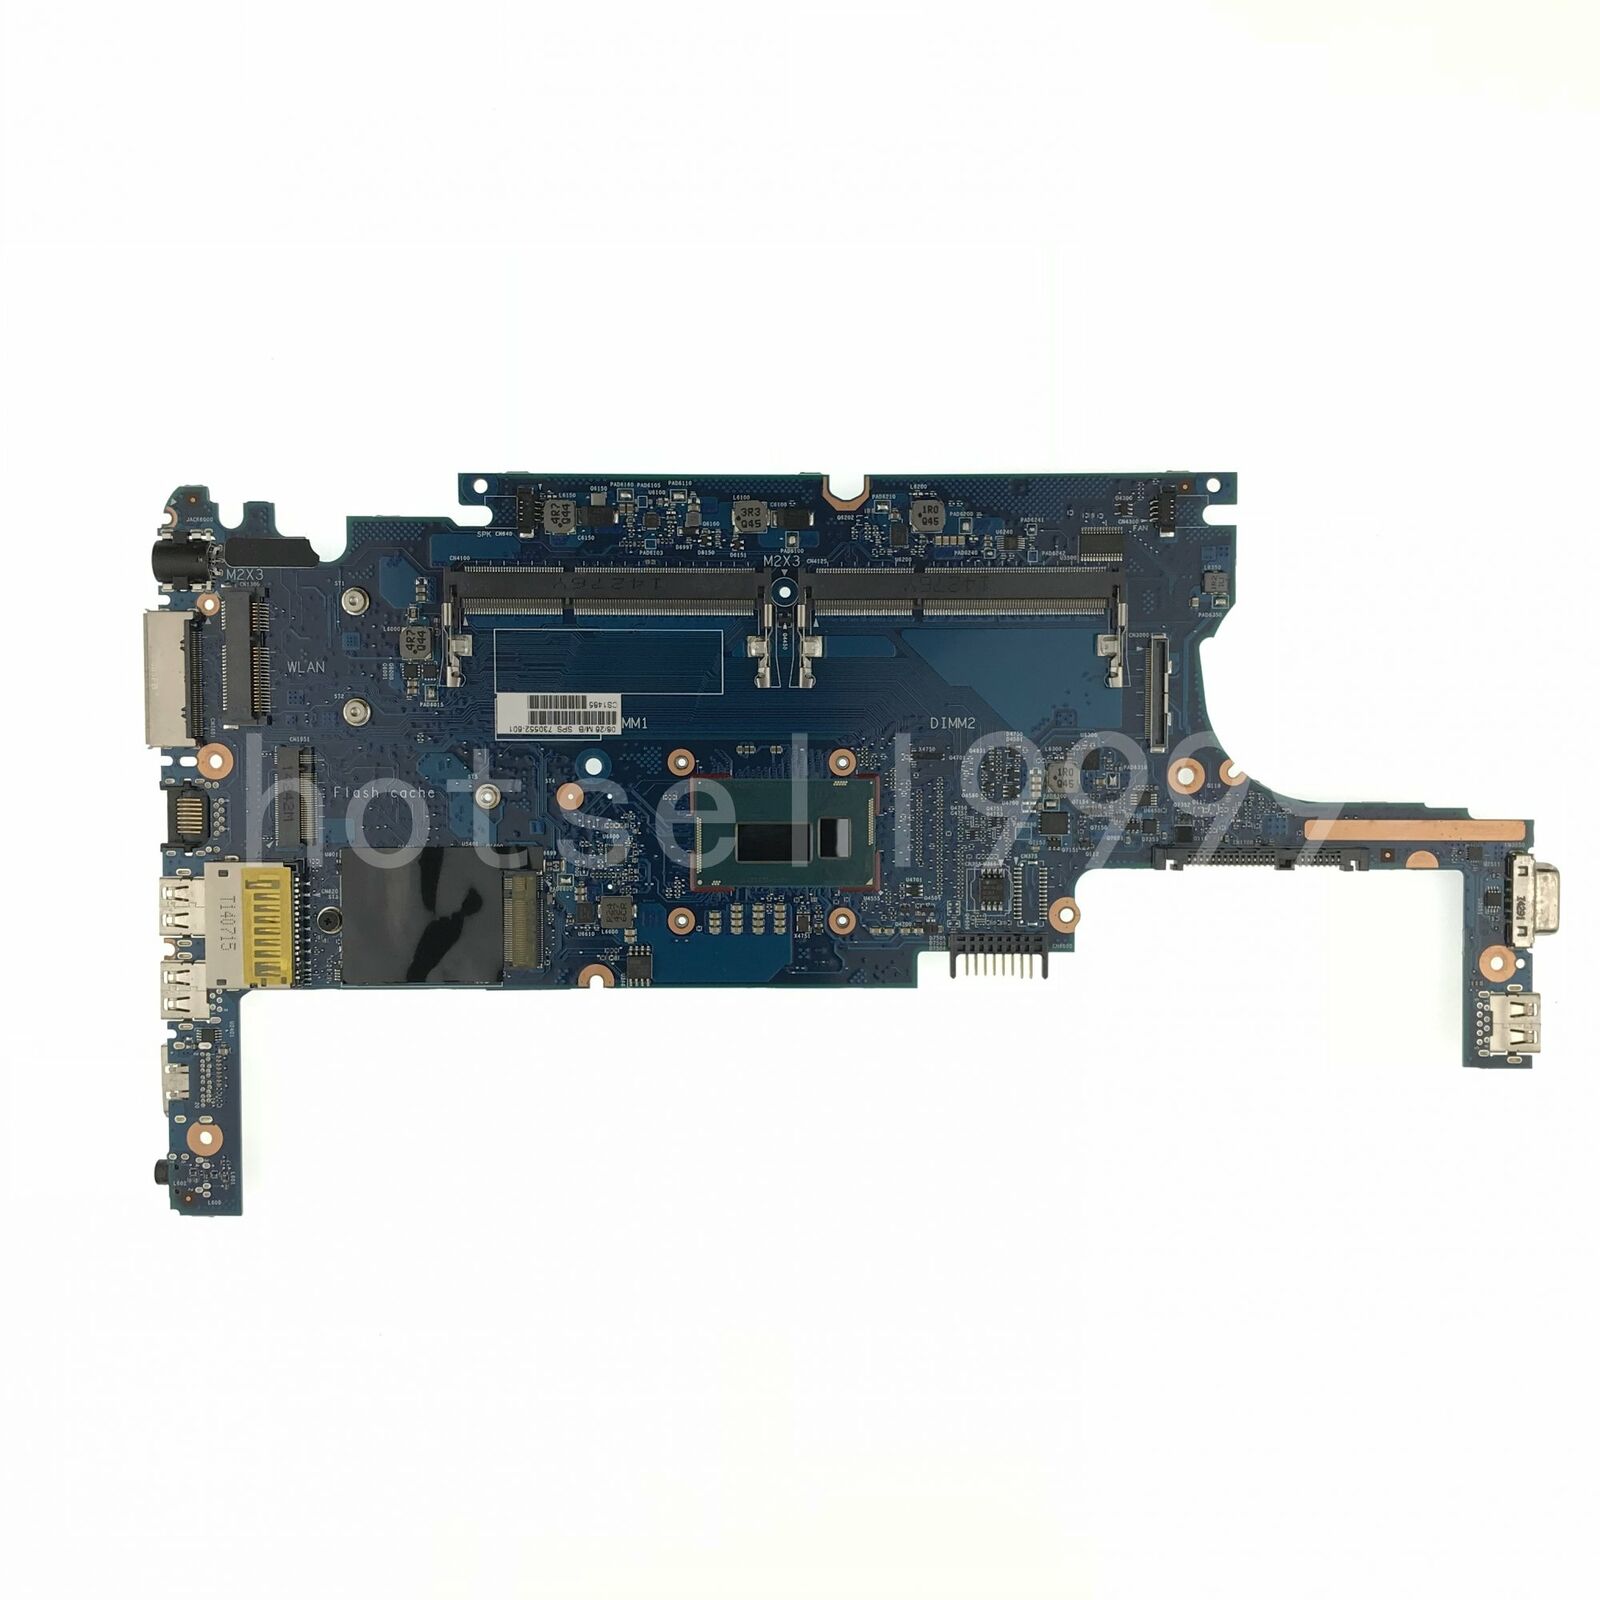 FOR HP Eilitebook 820 G1 Laptop Motherboard 730552-601 6050A2630701-MB-A01 Brand: HP Number of Memory Slot